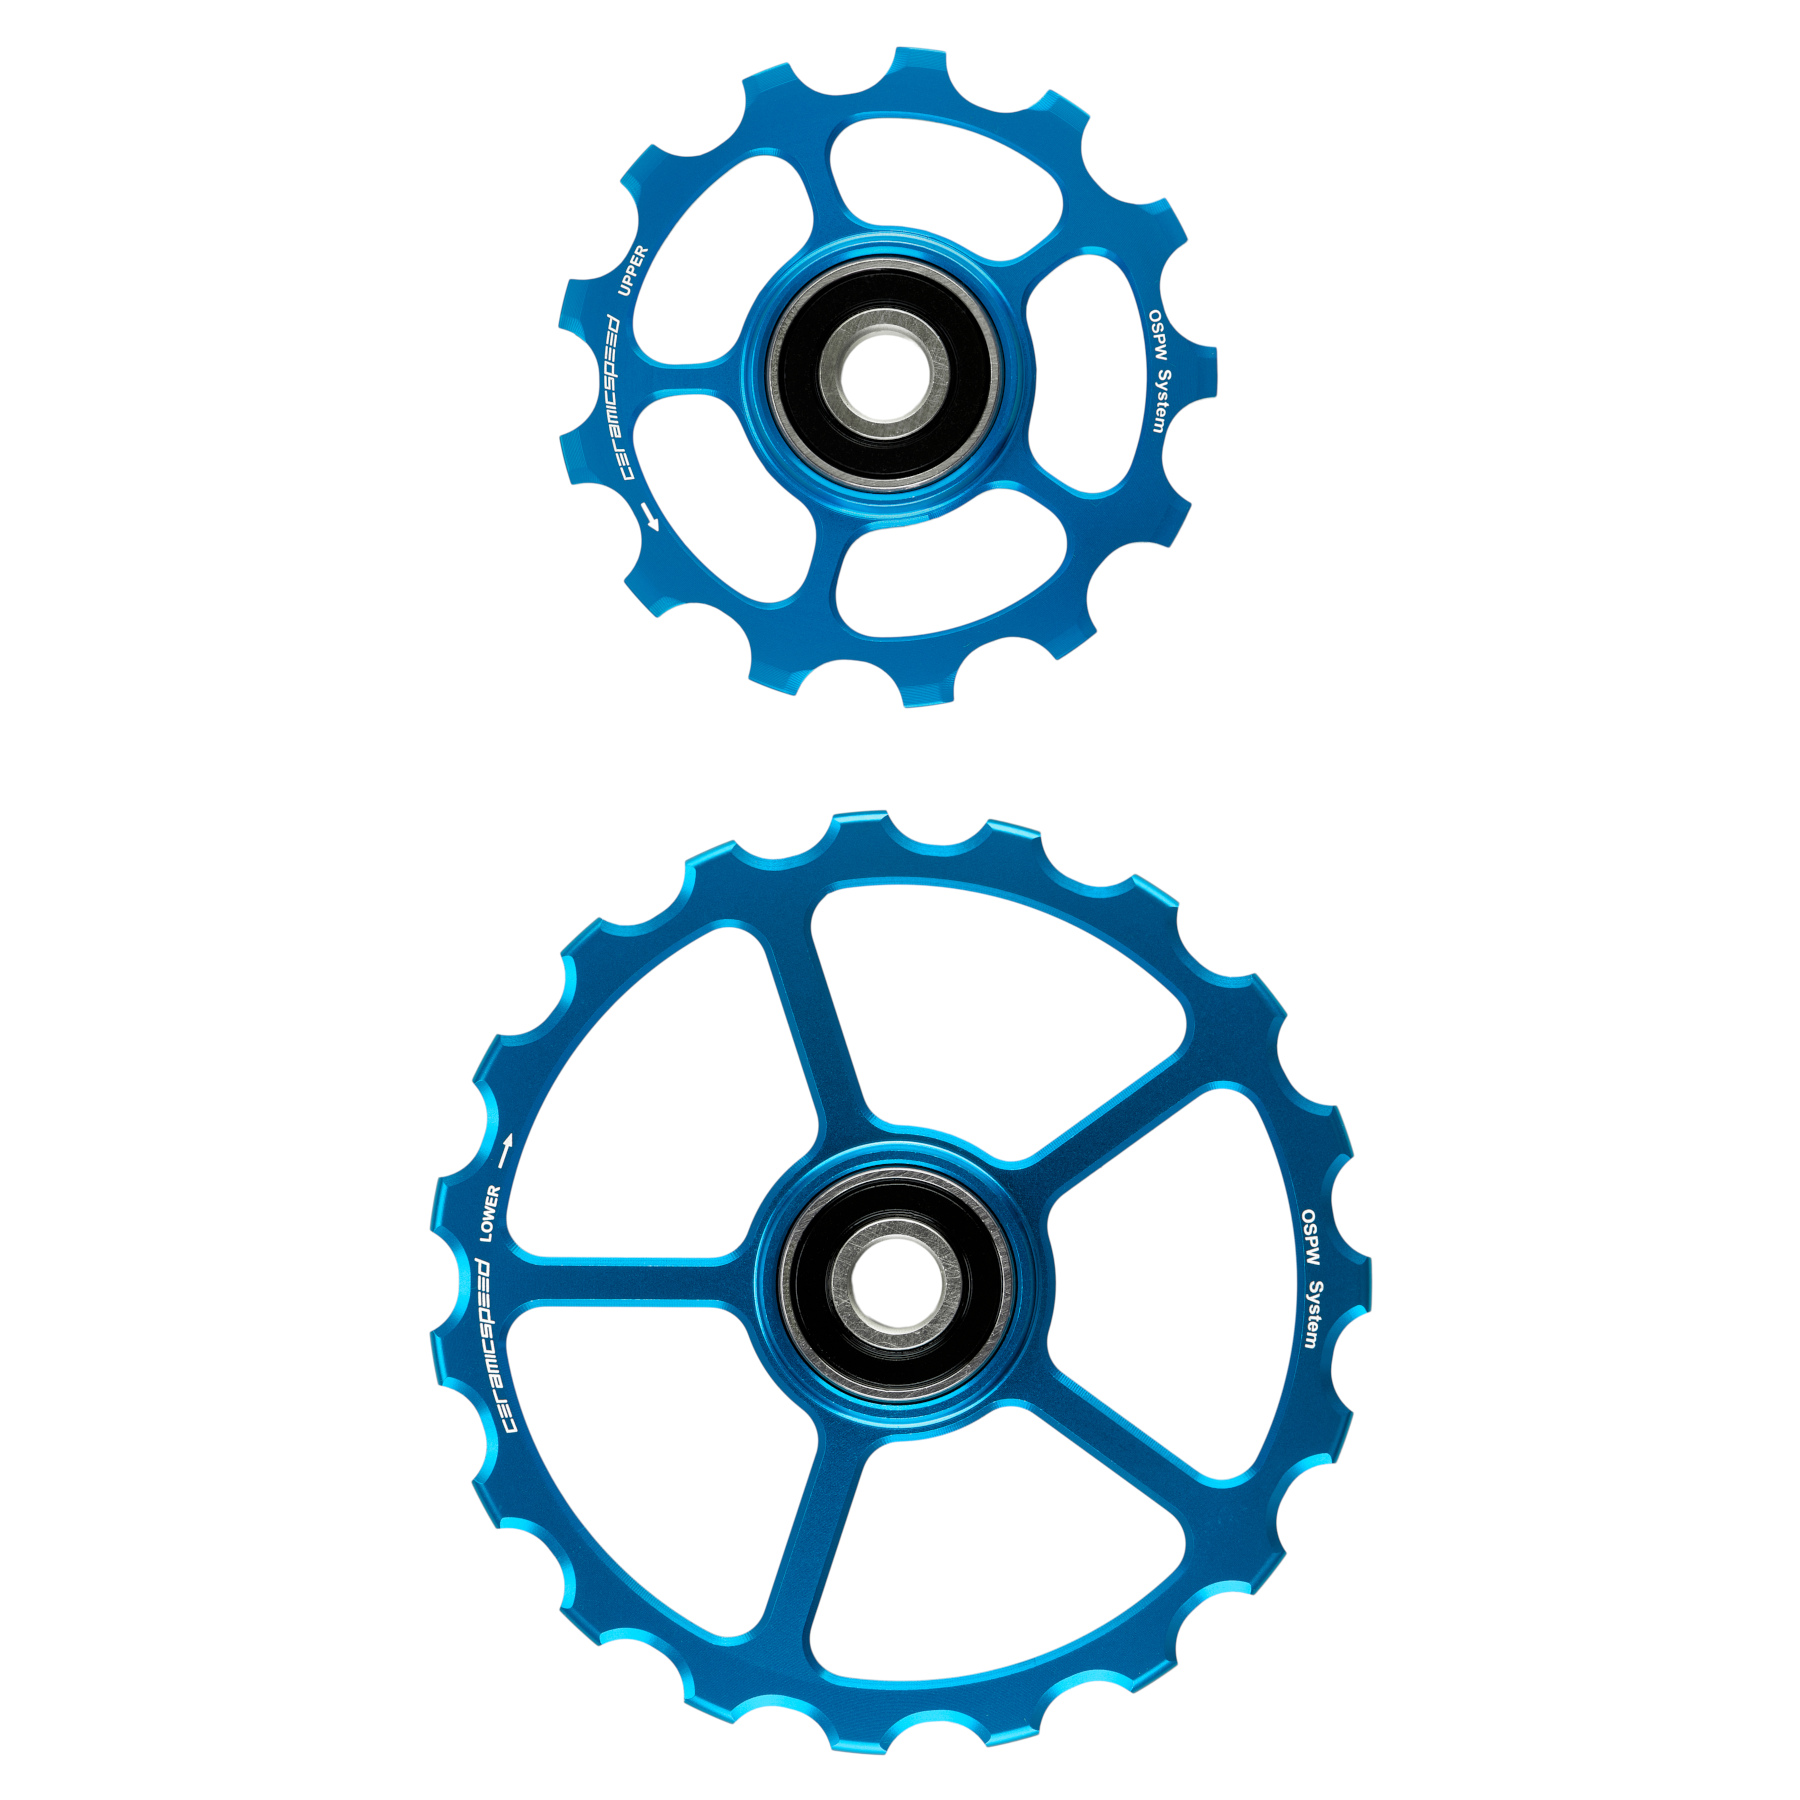 Picture of CeramicSpeed Replacement Derailleur Pulleys - OSPW | 13/19 Teeth - blue